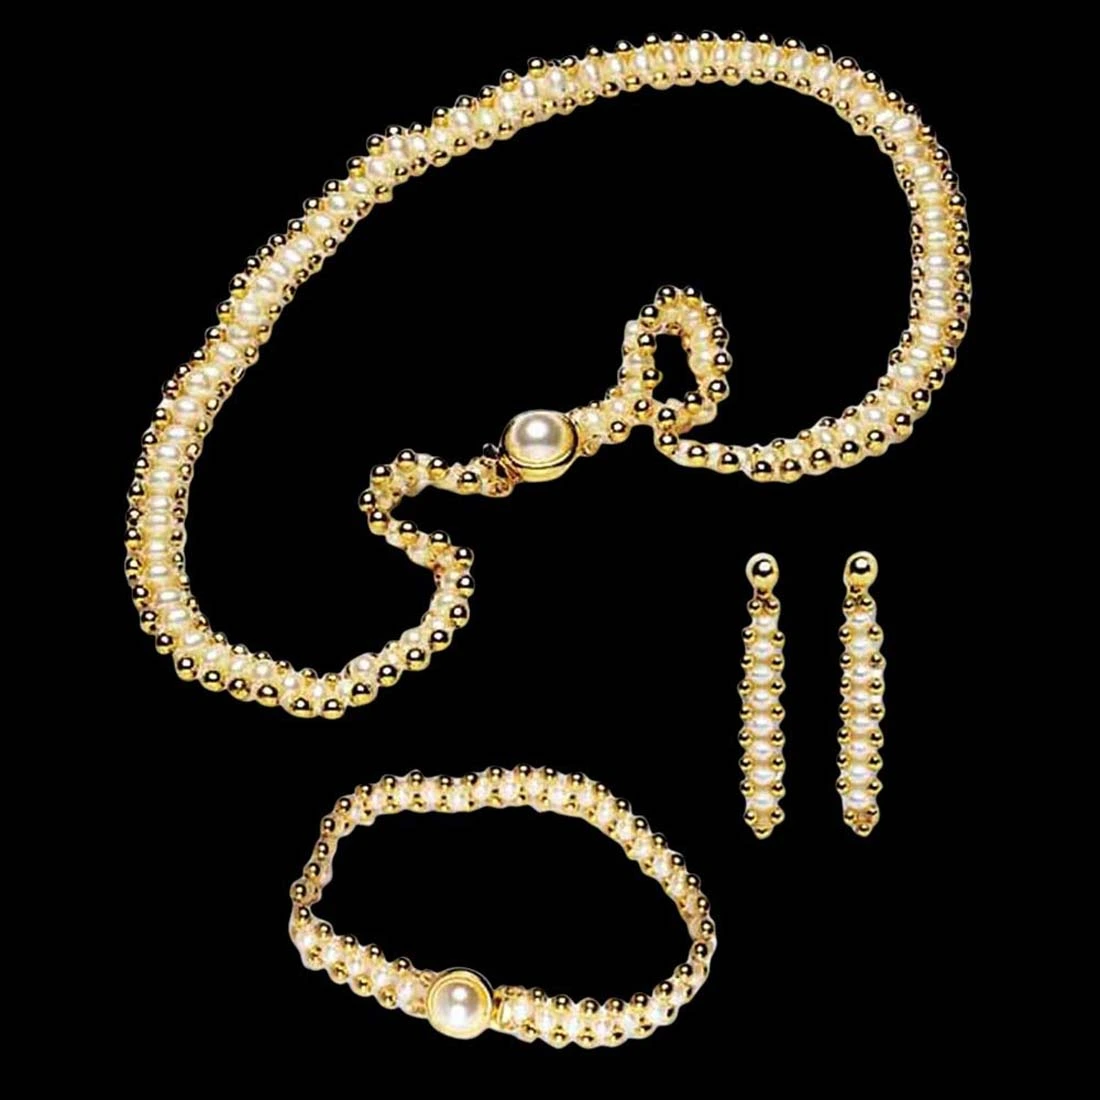 Enchanting Elegance Pearls - Real Freshwater Pearl & Gold Plated Beads Necklace, Bracelet & Earring Set for Women (SP96)